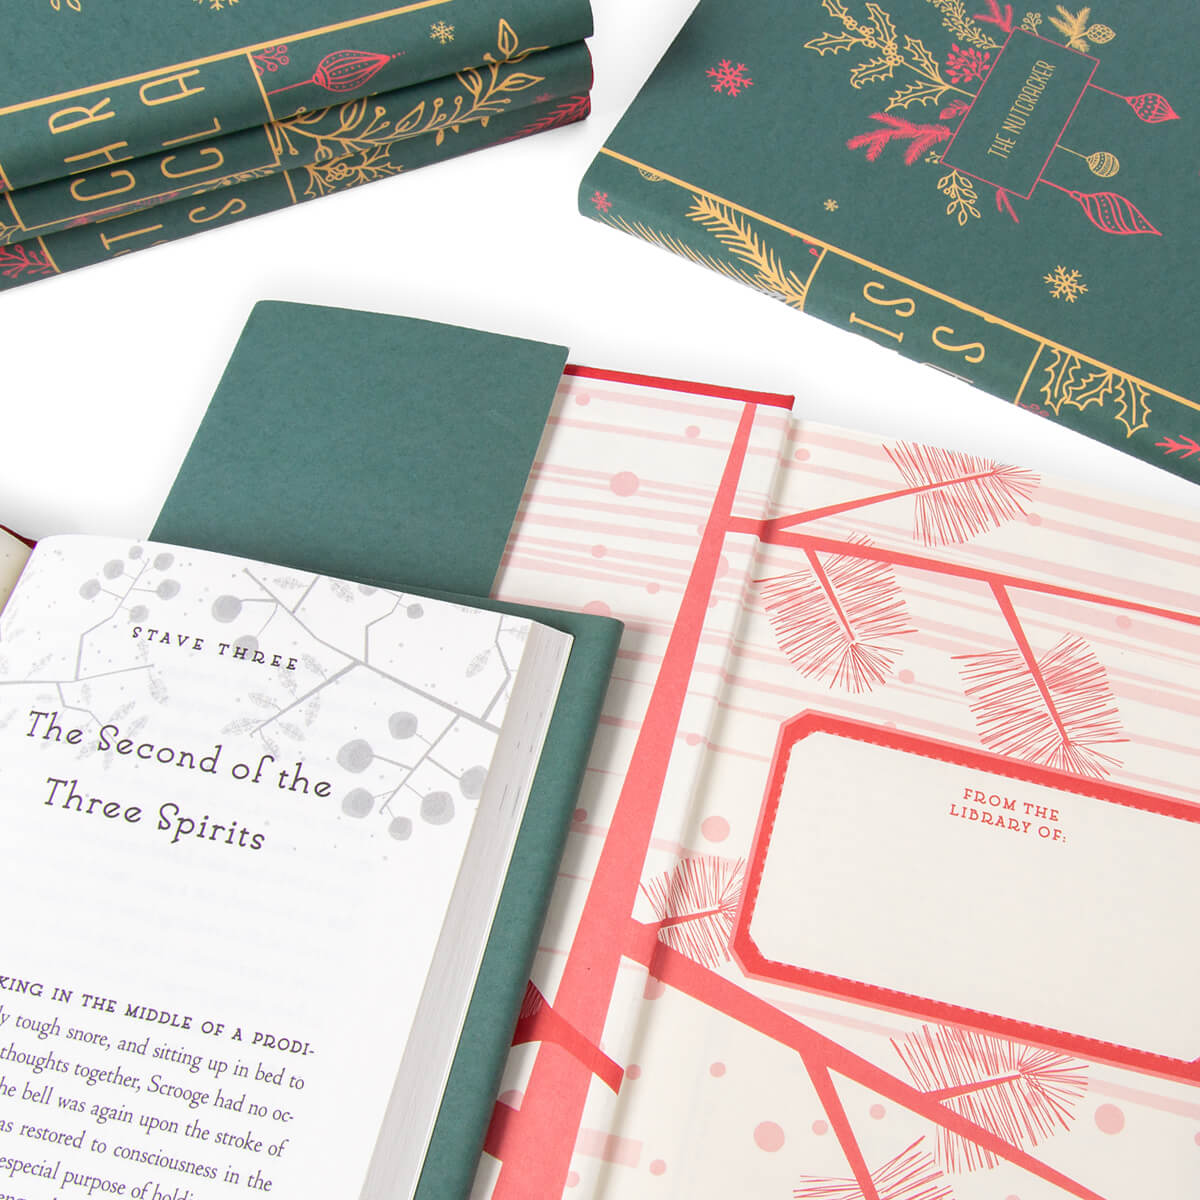 This festive set of novels is the perfect way to celebrate your favorite year-end traditions. Book Set, gift, trade, Christmas shopping. Detail shot of font in books in the Christmas Classic Book Set.